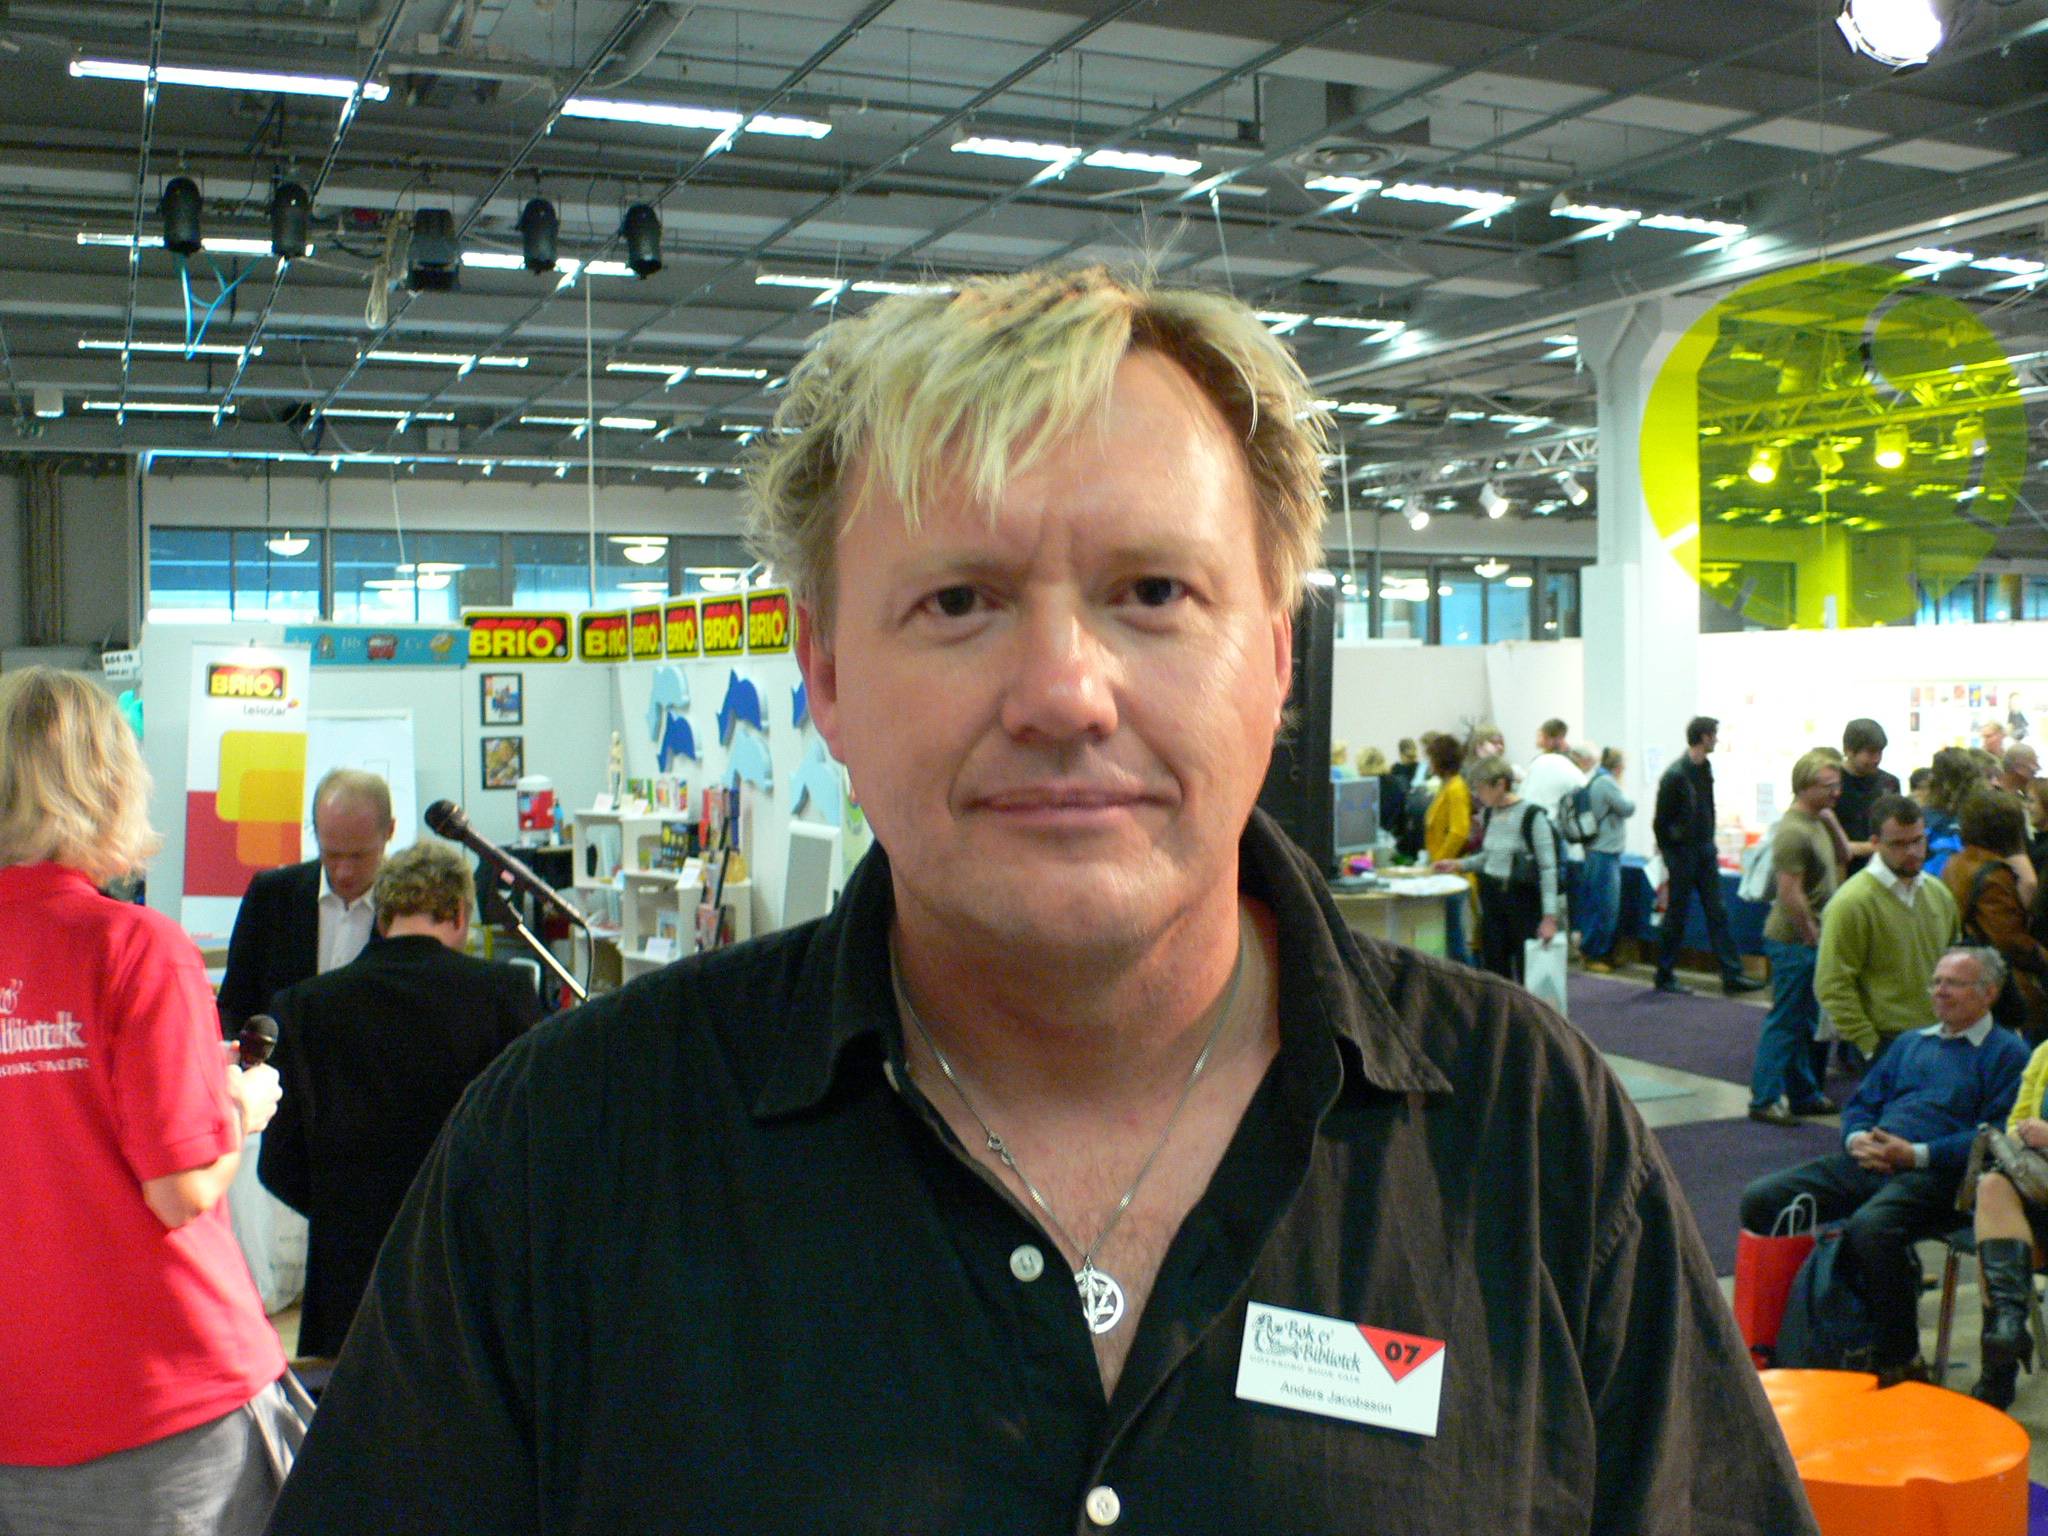 Anders Jacobsson at the Gothenburg Book Fair in 2007.